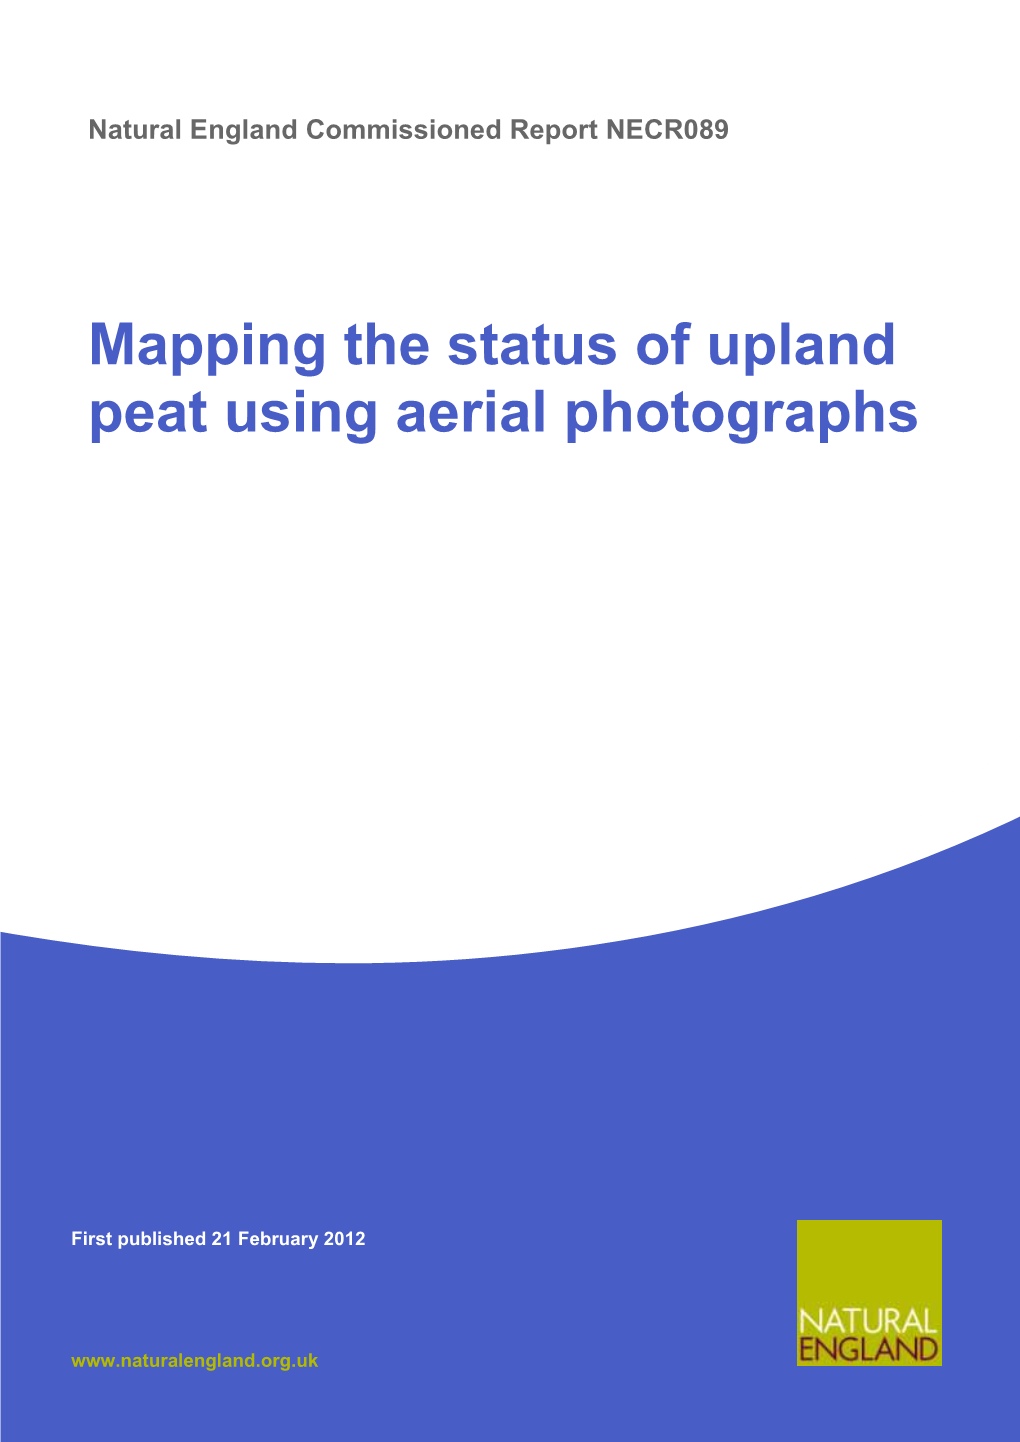 Mapping the Status of Upland Peat Using Aerial Photographs